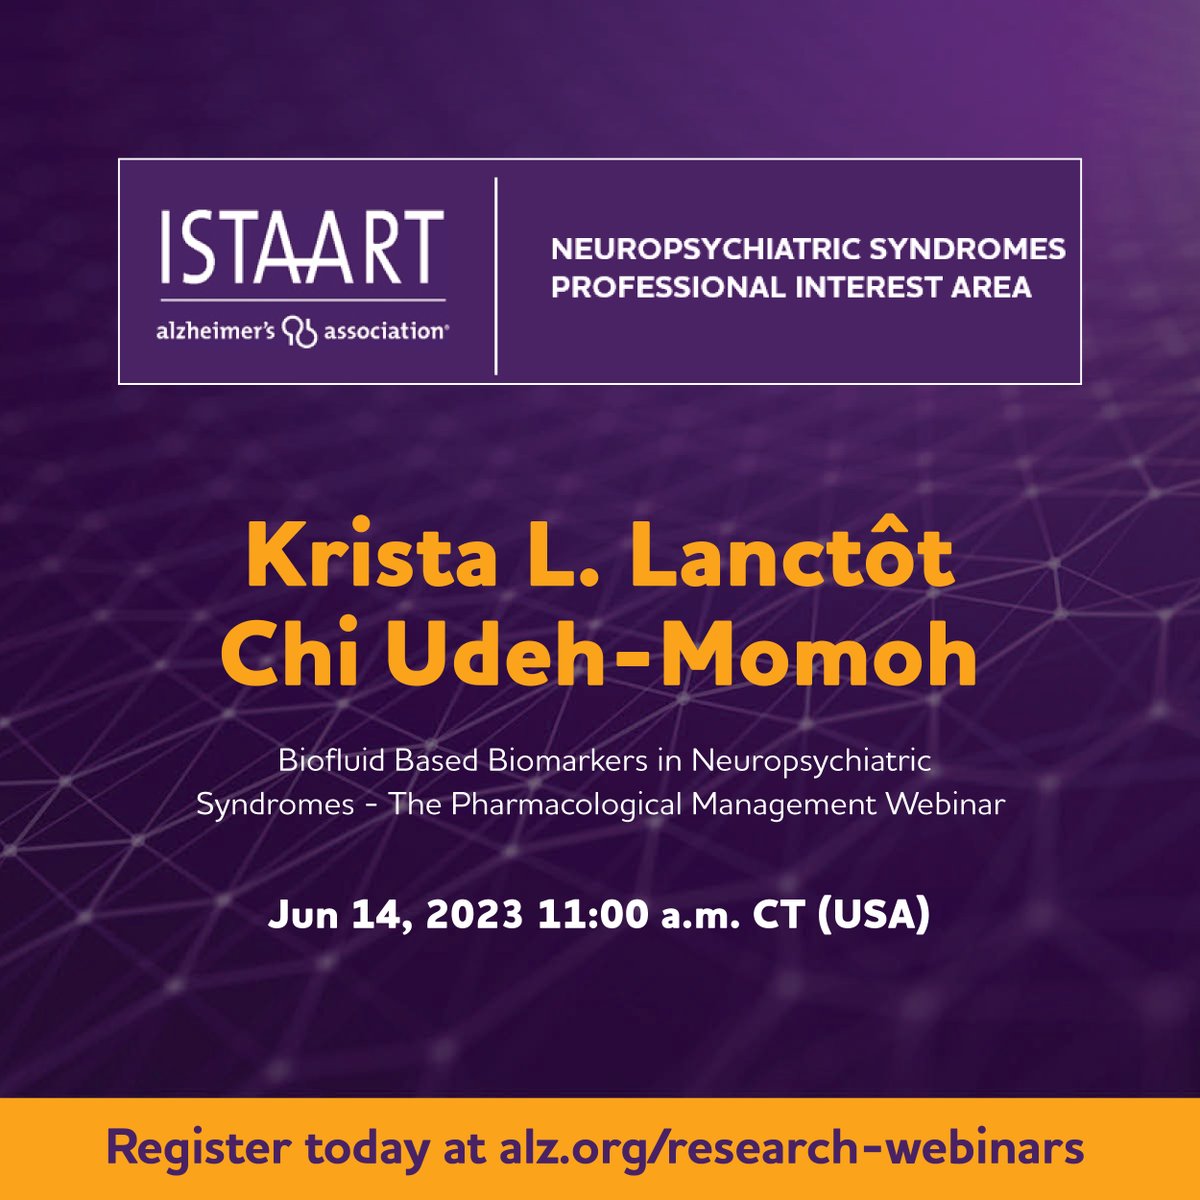 ❗Reminder ❗ The joint webinar between the @NeuroPsychPIA and @FluidMarkersPIA is next week, on 6/14/23 at 11AM CT! @KristaLanctot and Chi Udeh-Momoh will be presenting on Biofluid Based Biomarkers in Neuropsychiatric Syndromes. Register at alz.org/research-webin…